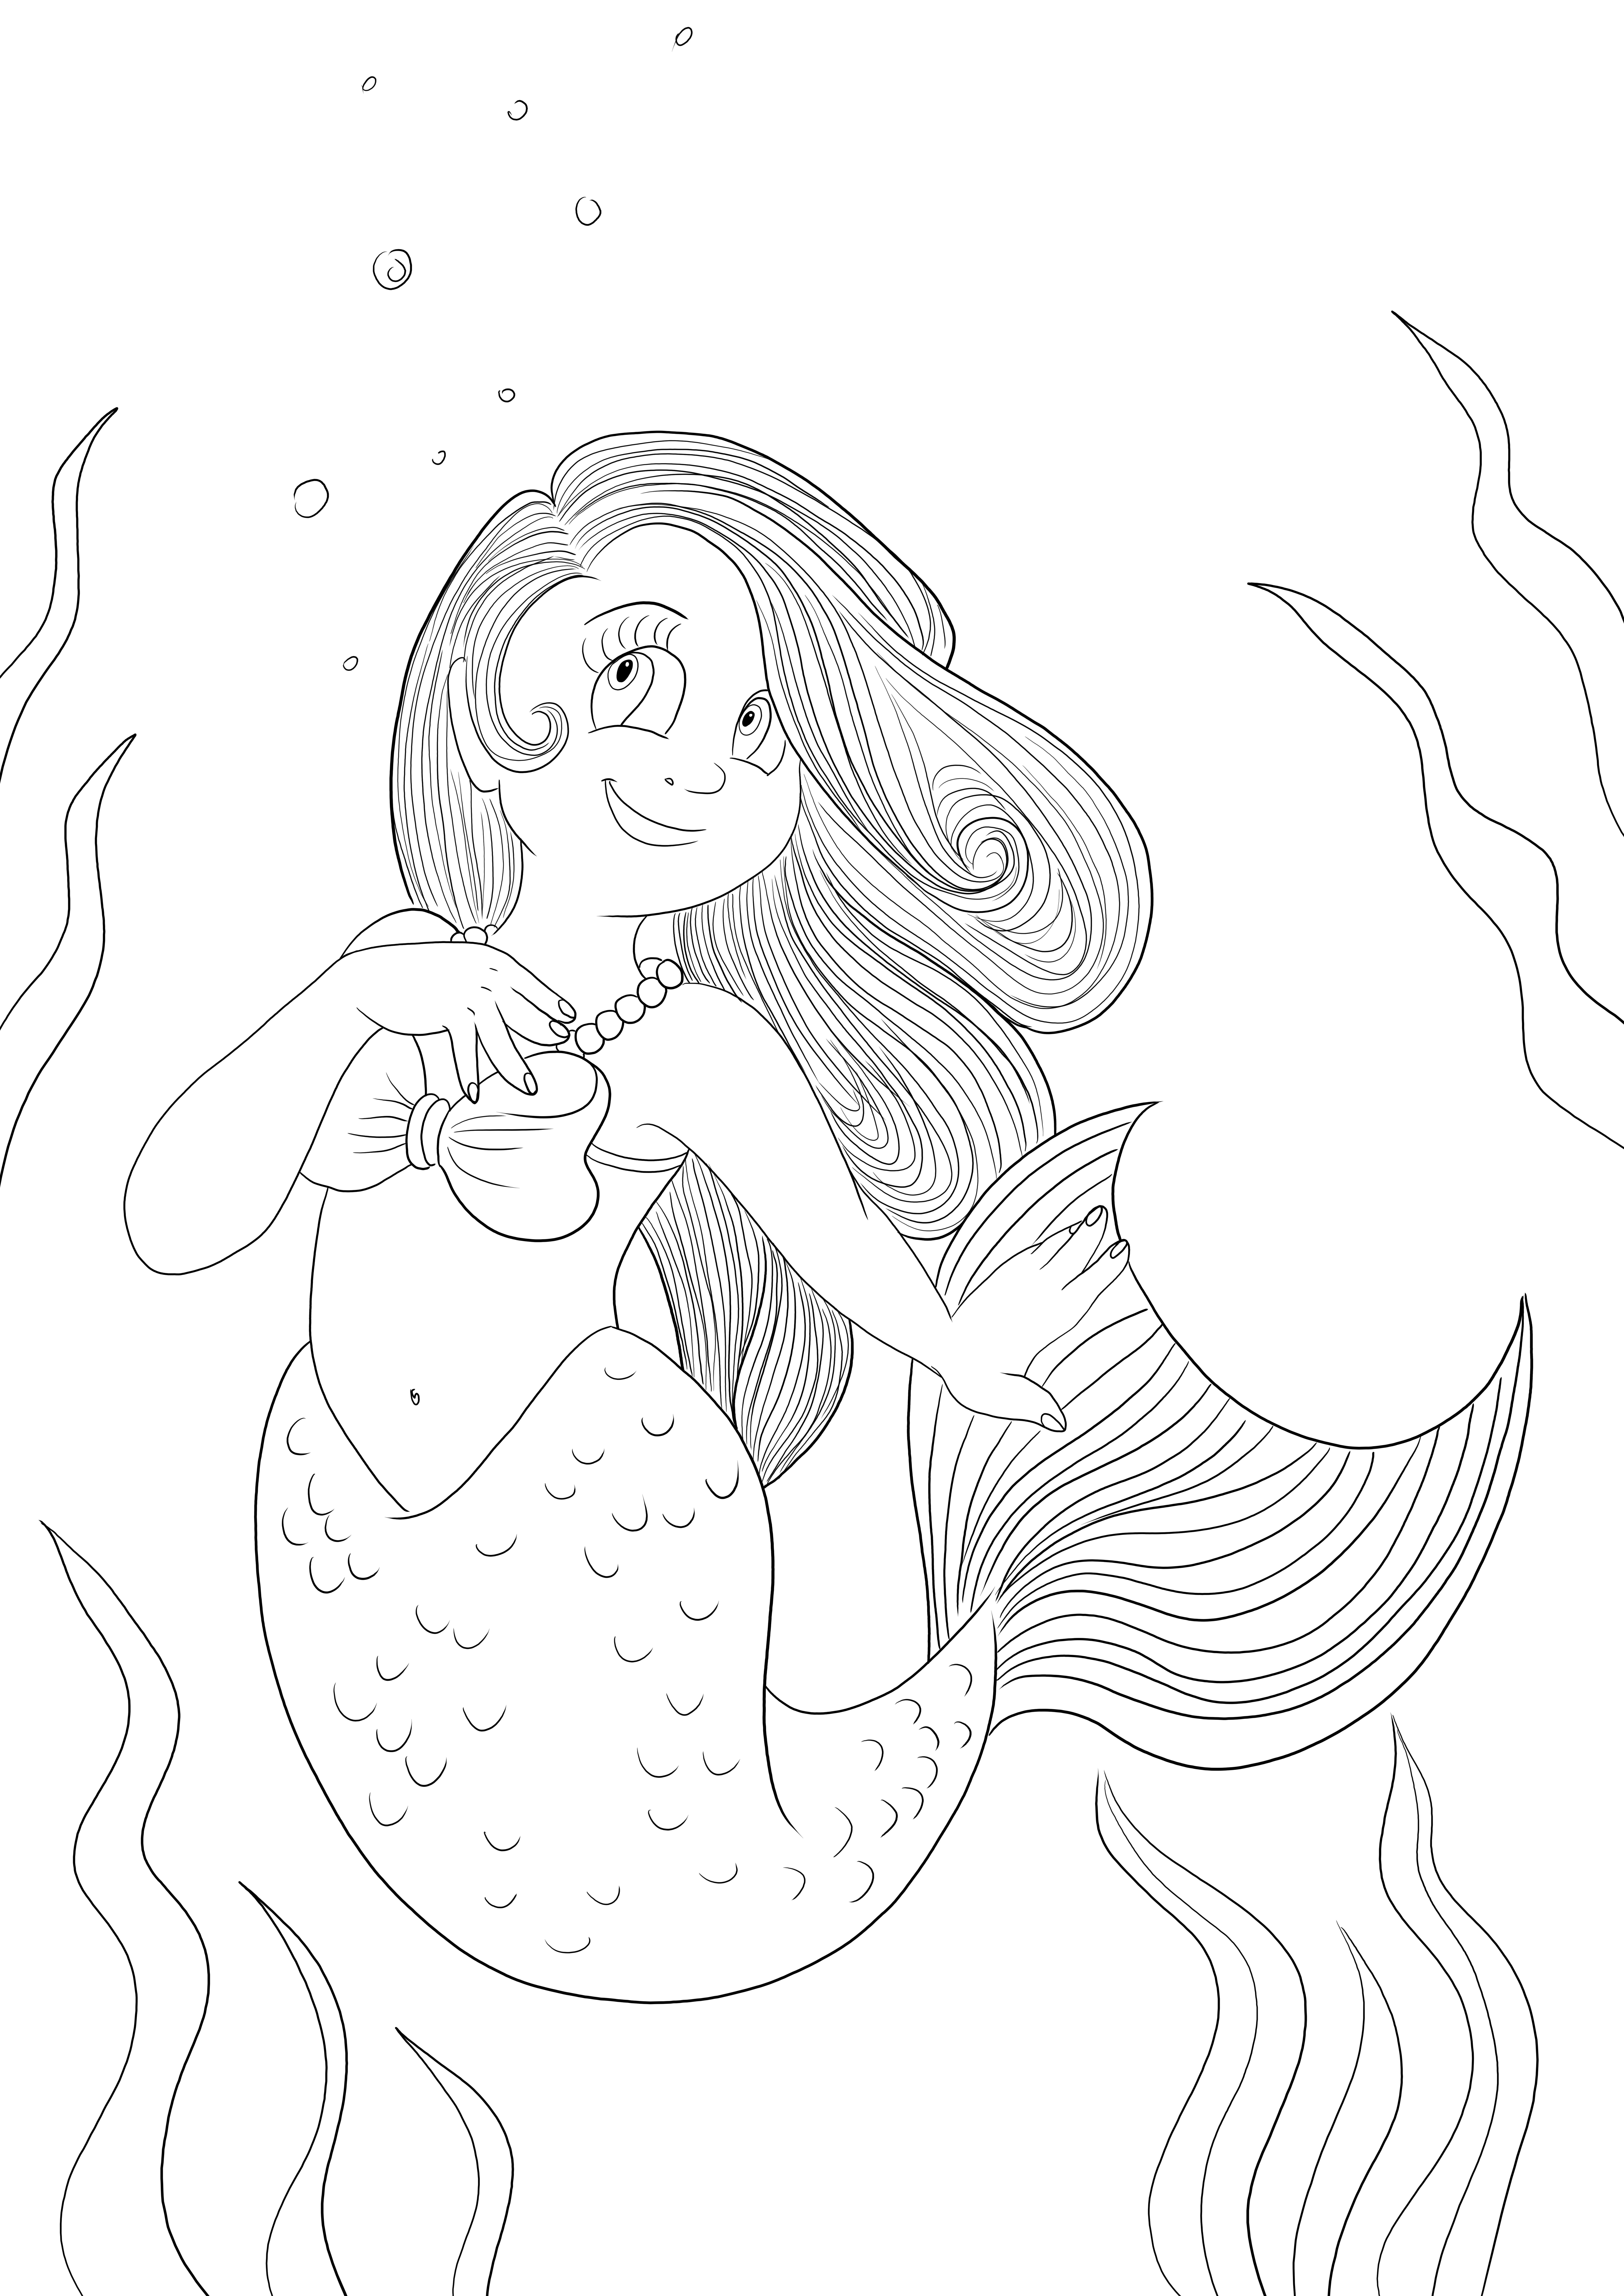 Funny mermaid free to color and print image for kids of all ages